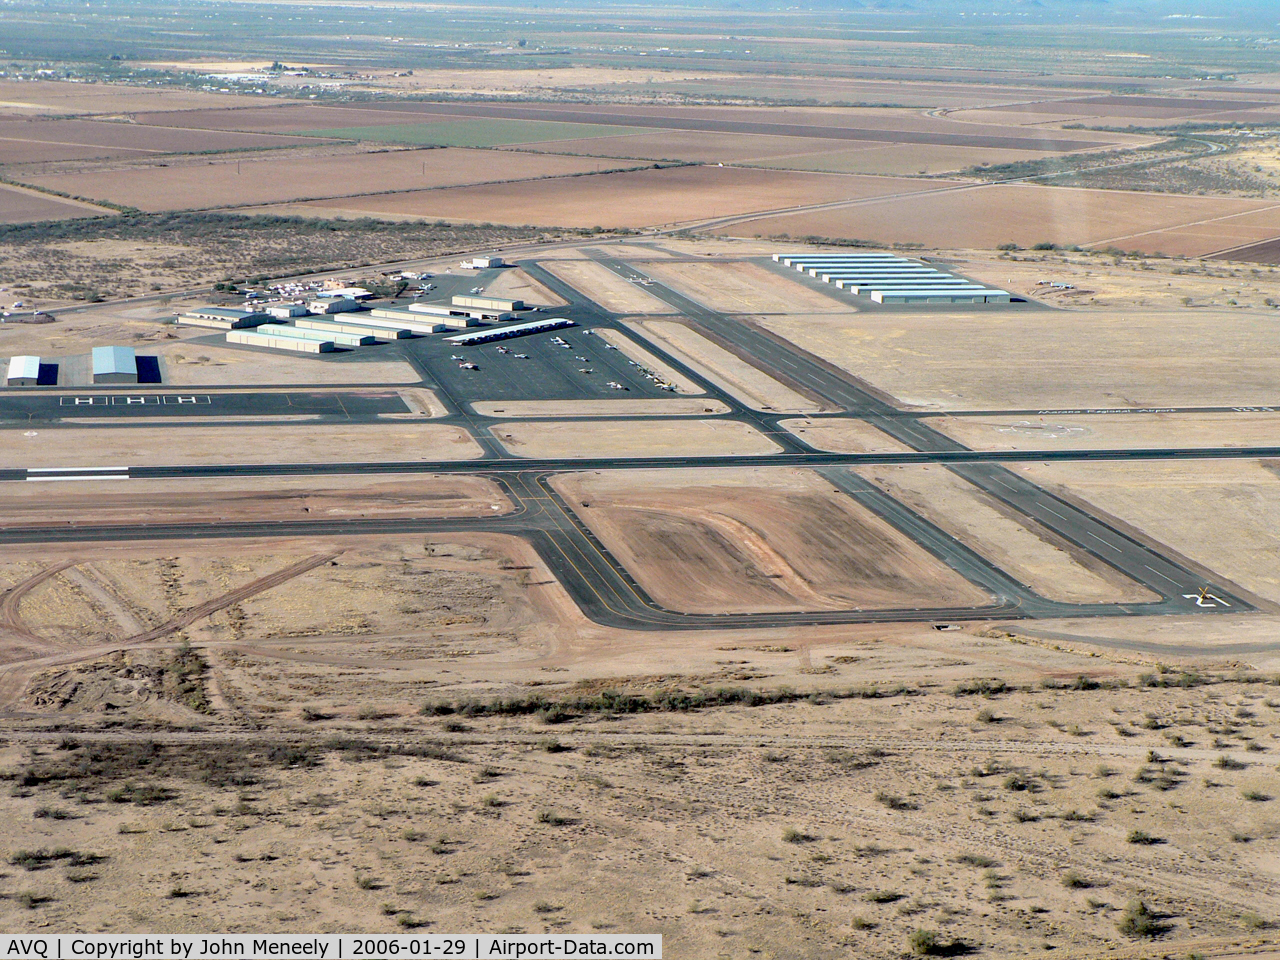 Marana Regional Airport (AVQ) - Taken from Cessna 182 N756EB while on a sightseeing flight